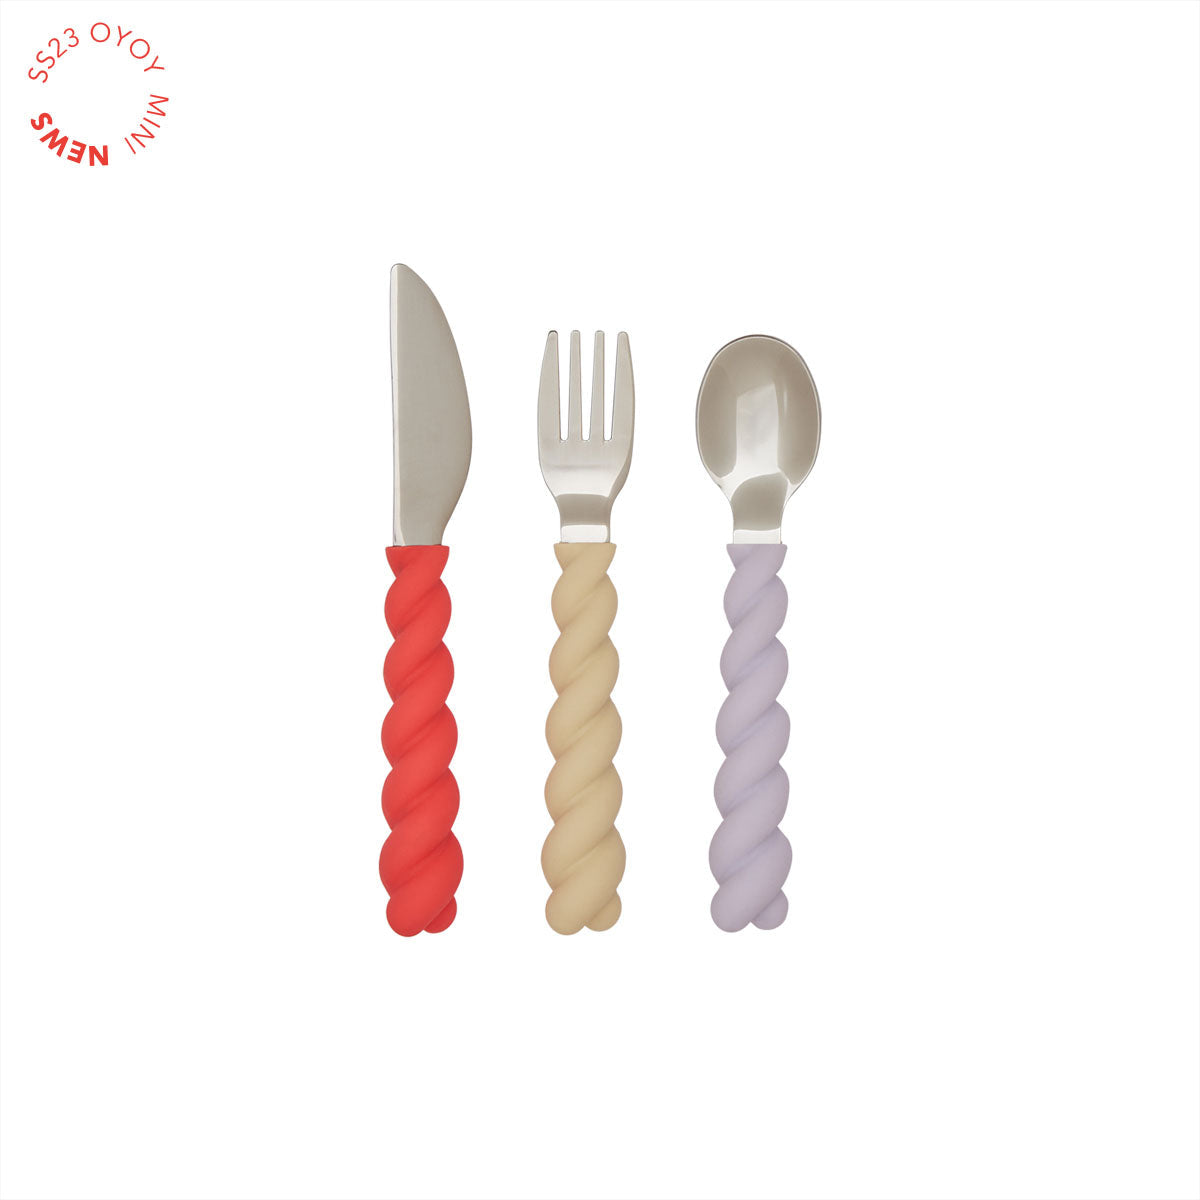 OYOY MINI Mellow Cutlery - Pack of 3 Dining Ware 501 Lavender / Vanilla / Cherry Red